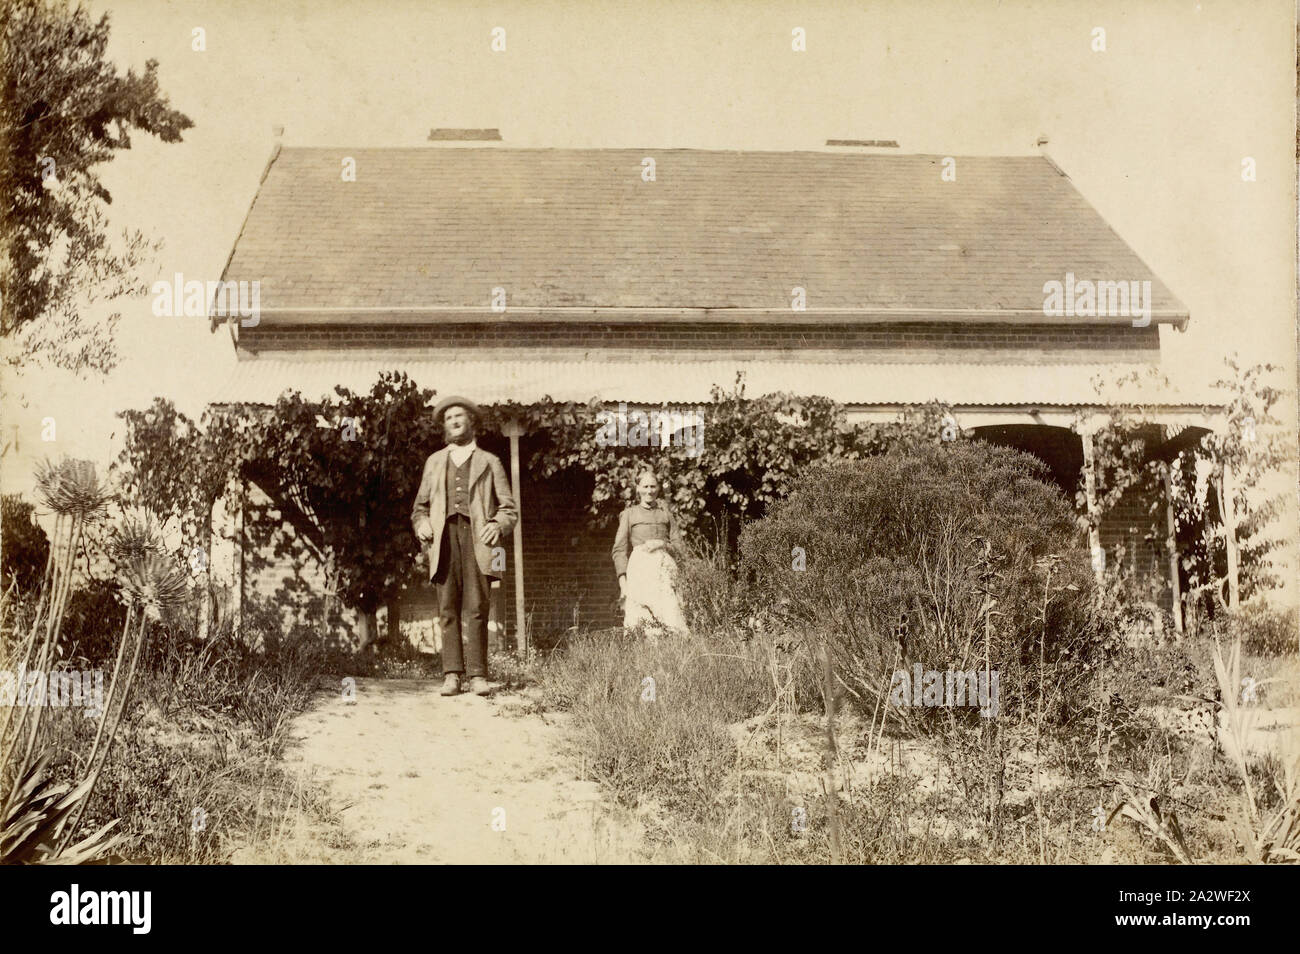 Digital Photograph - Charles & Ellen Partington Outside 'Willis Vale' Homestead, Greensborough, Victoria, circa 1885, Charles Partington (senior) and his wife Ellen (nee Whatmough), standing in front of the old 'Willis Vale' homestead, at Greensborough. The house was built in 1839 of hand-made bricks, all made and fired on the property Stock Photo